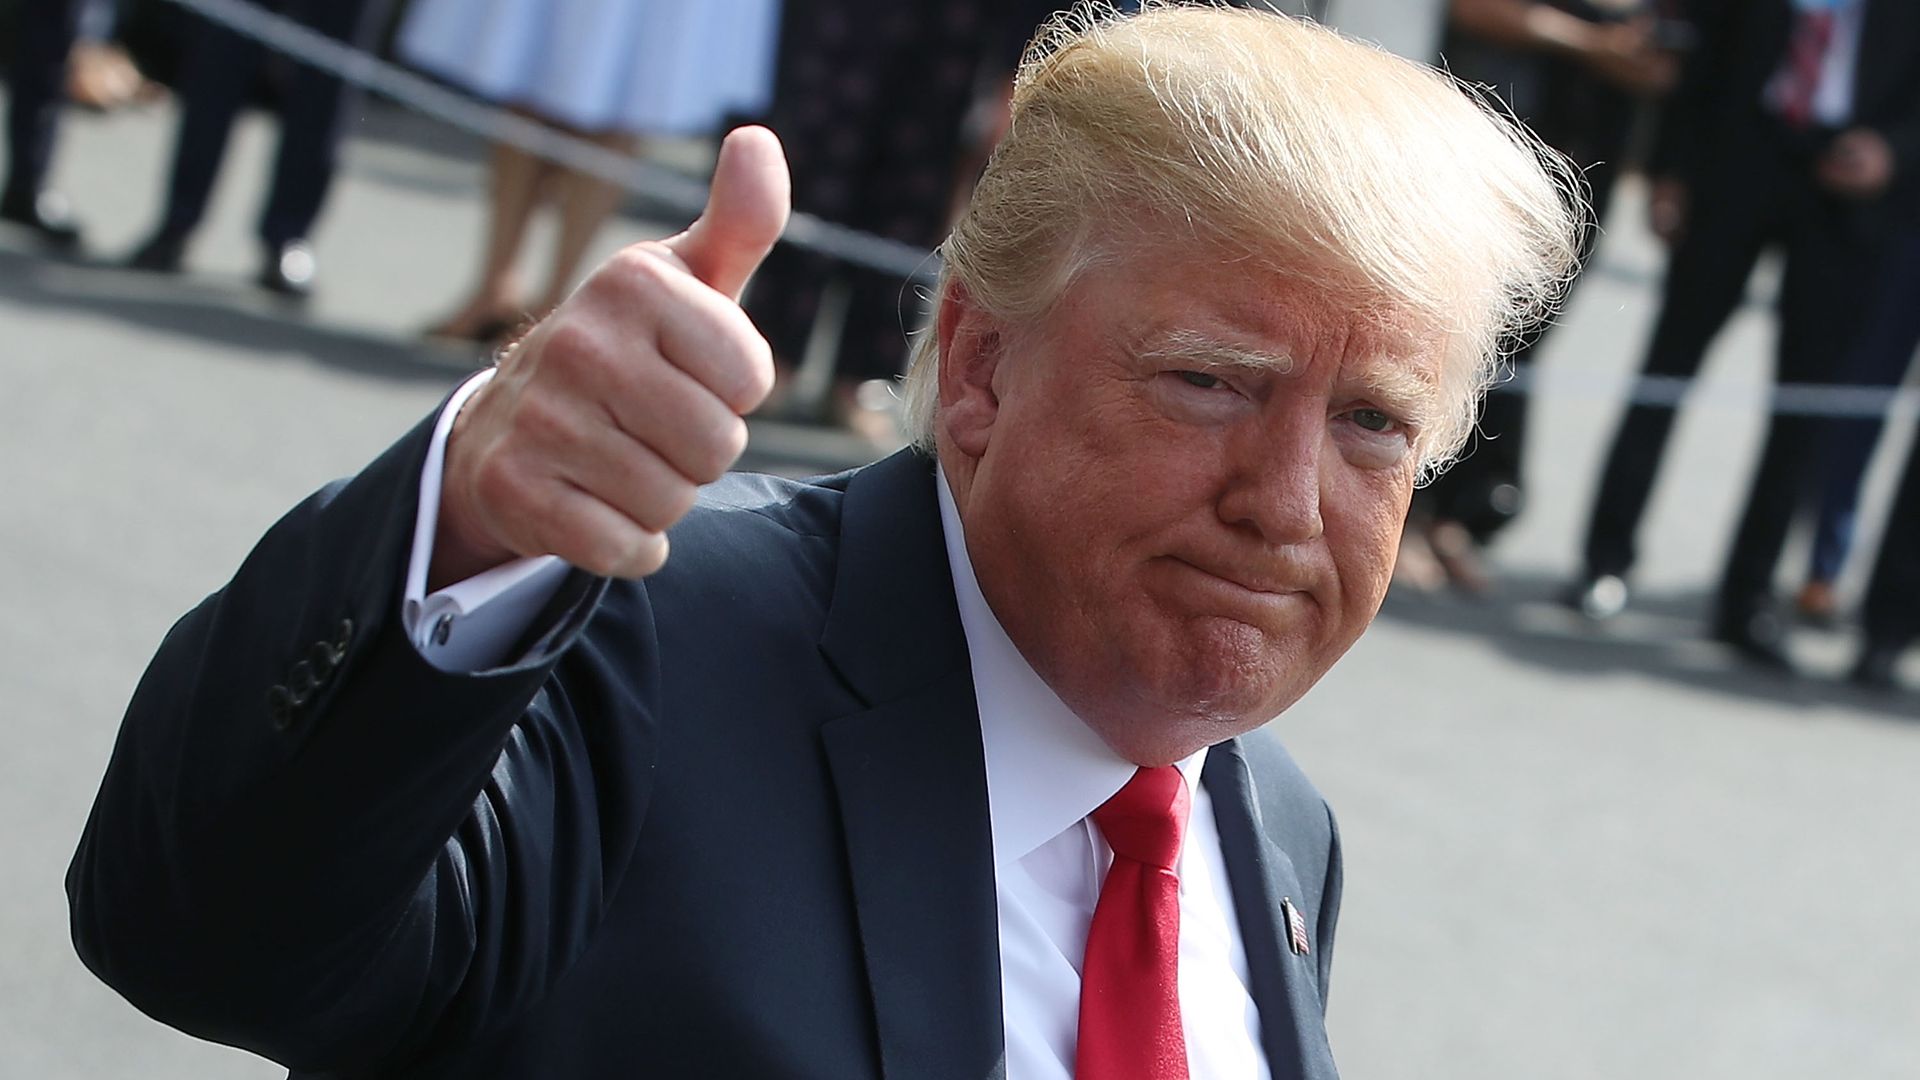 Donald Trump giving a thumbs-up.